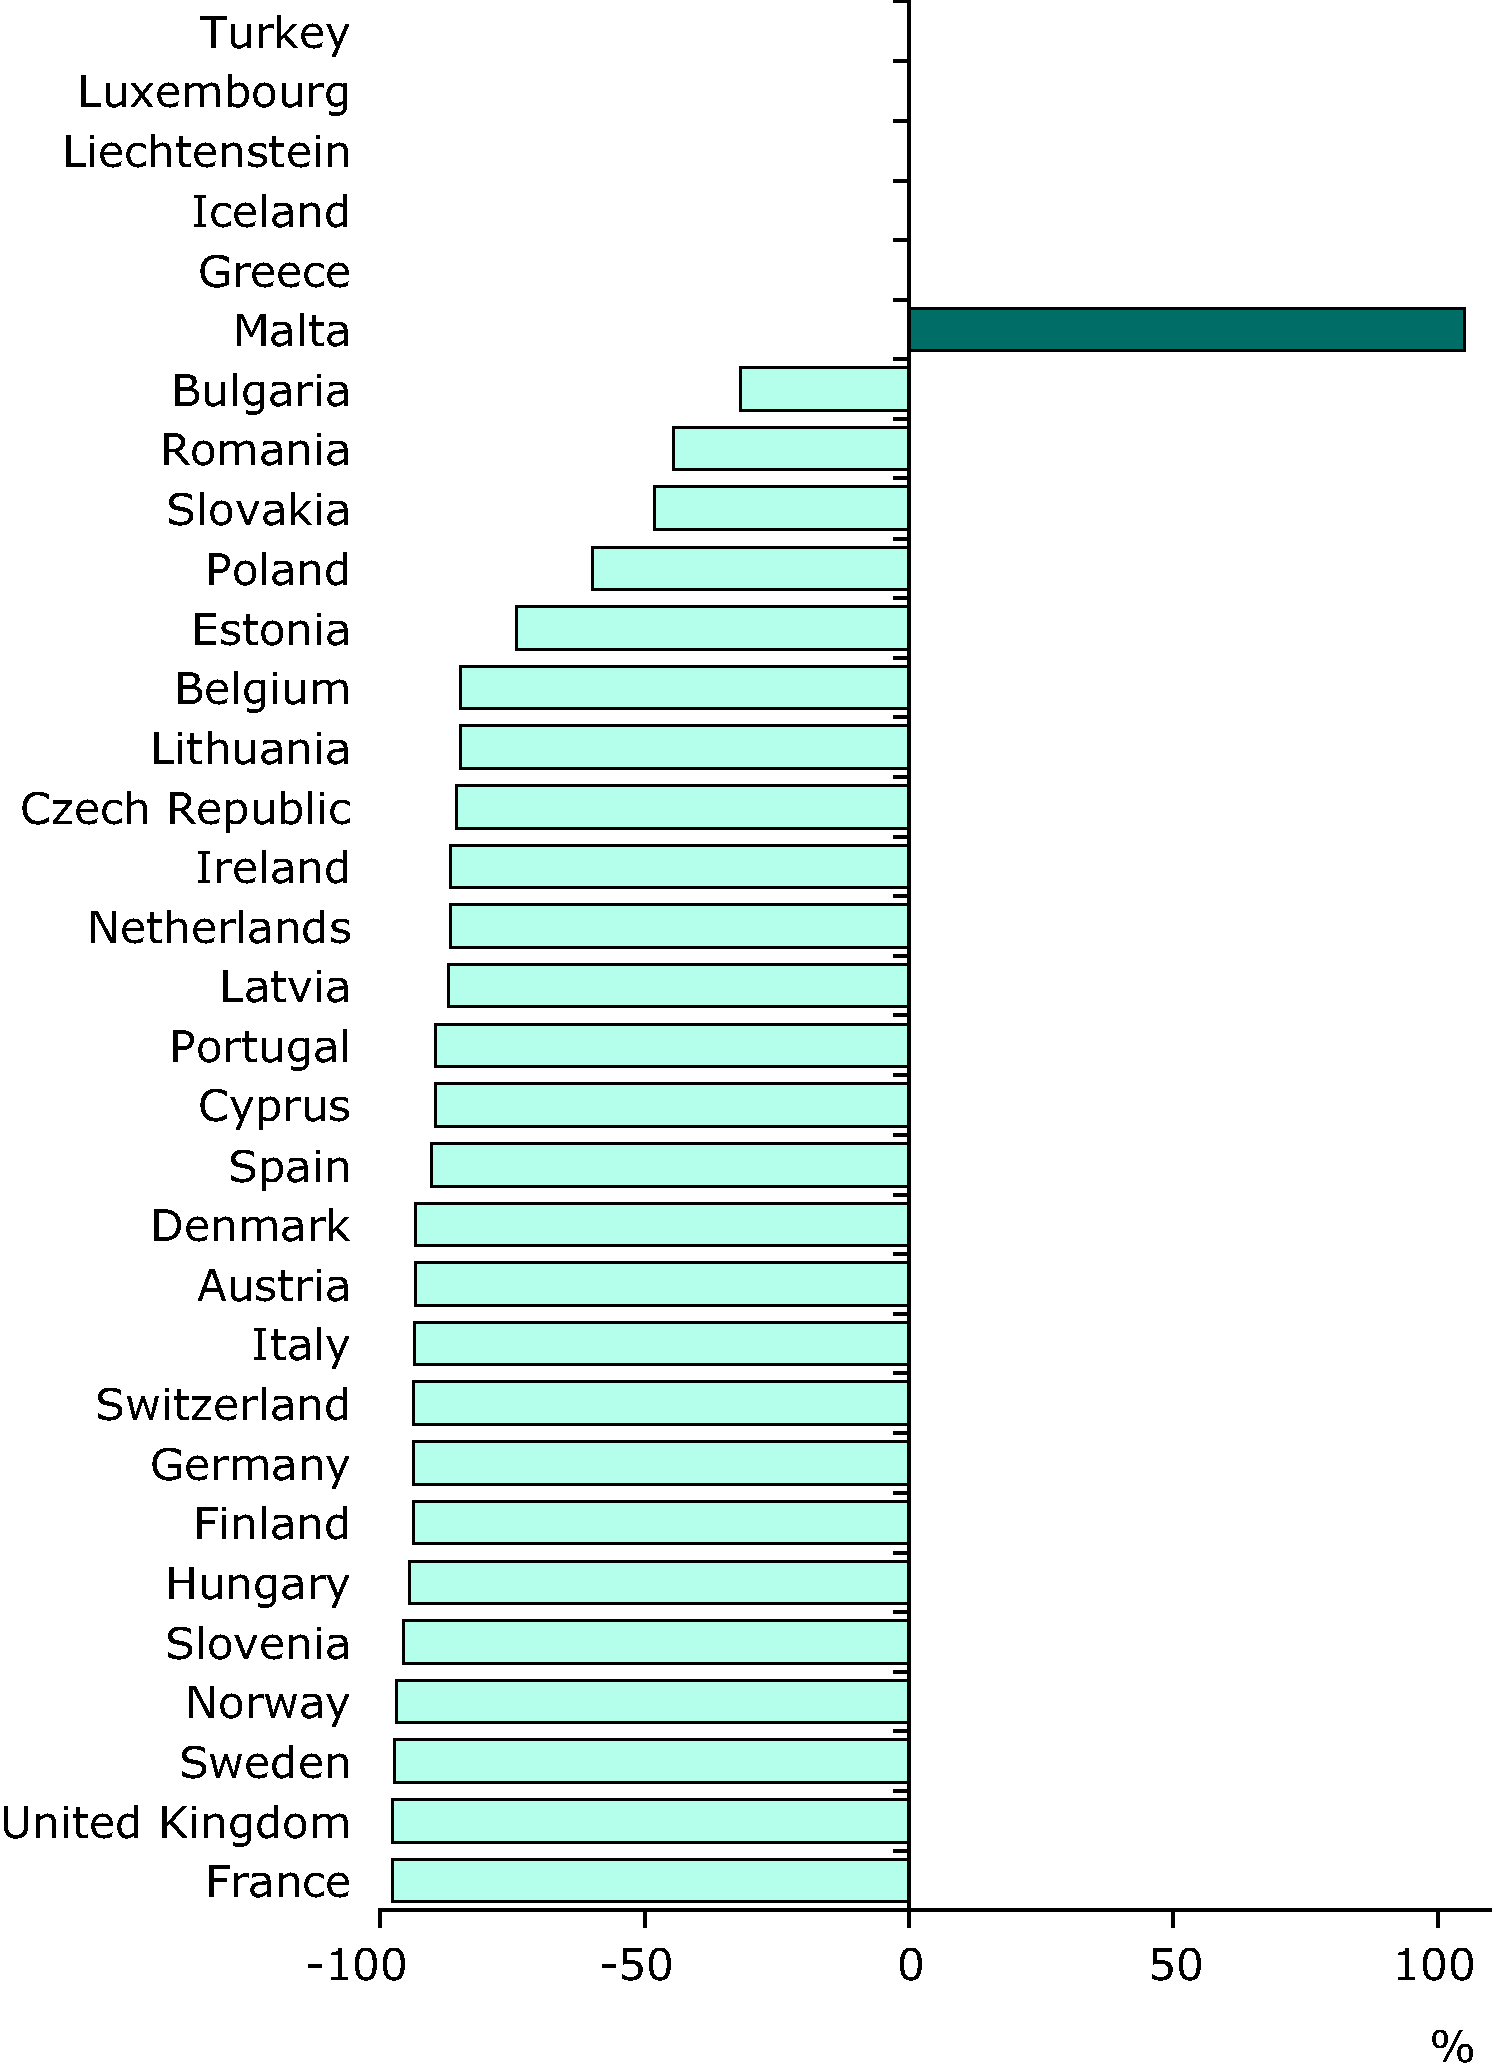 Change (%) in lead emissions 1990-2008 (EEA member countries)